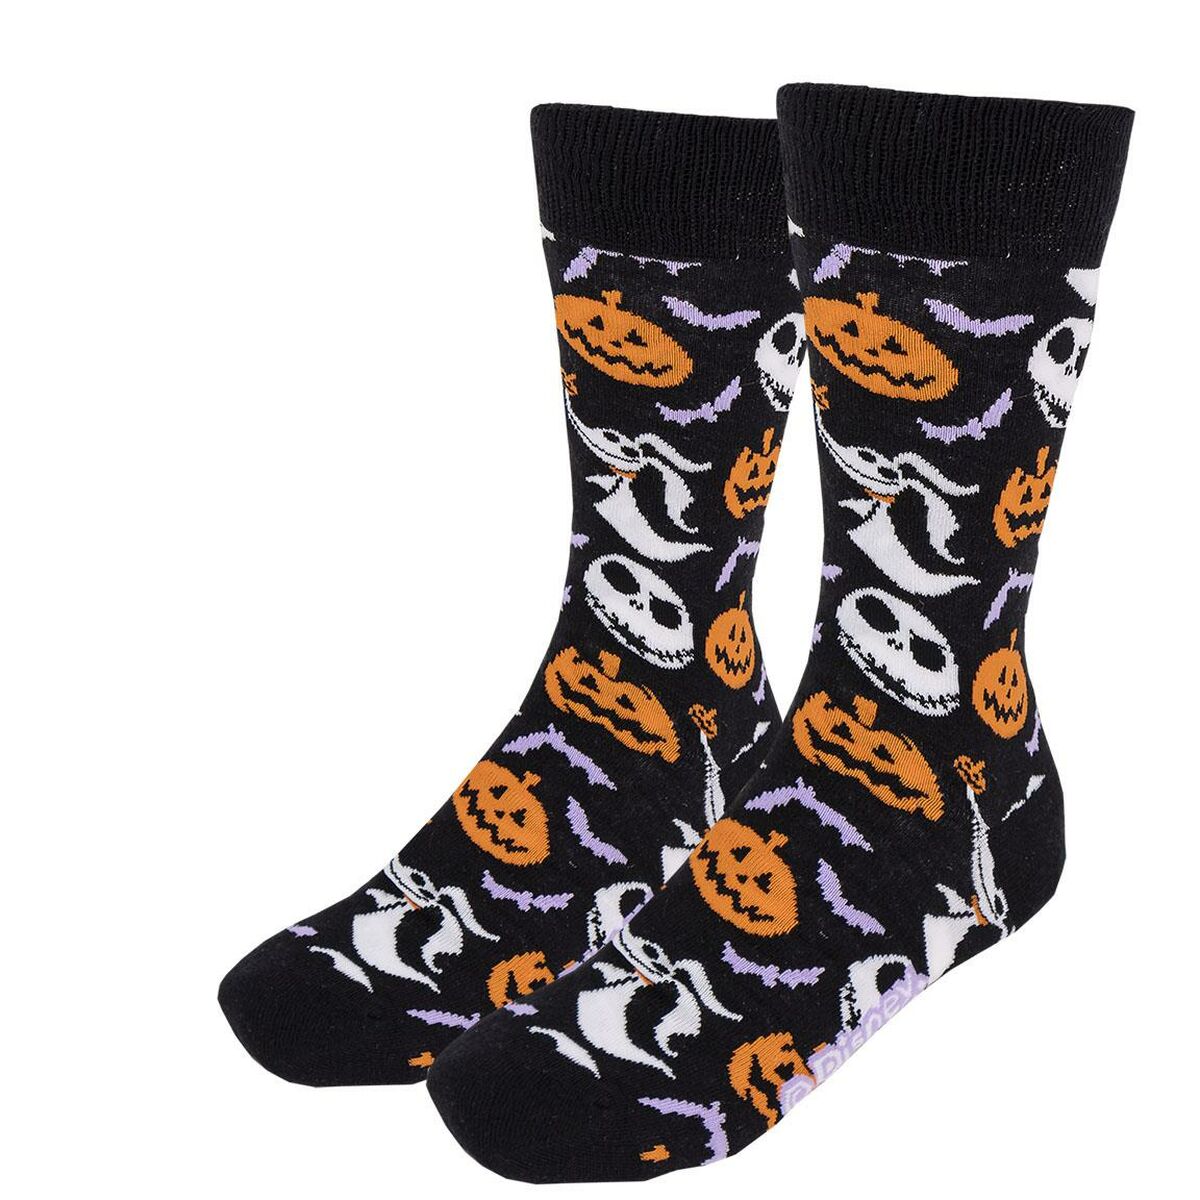 Chaussettes The Nightmare Before Christmas 3 Pièces Multicouleur 40-46